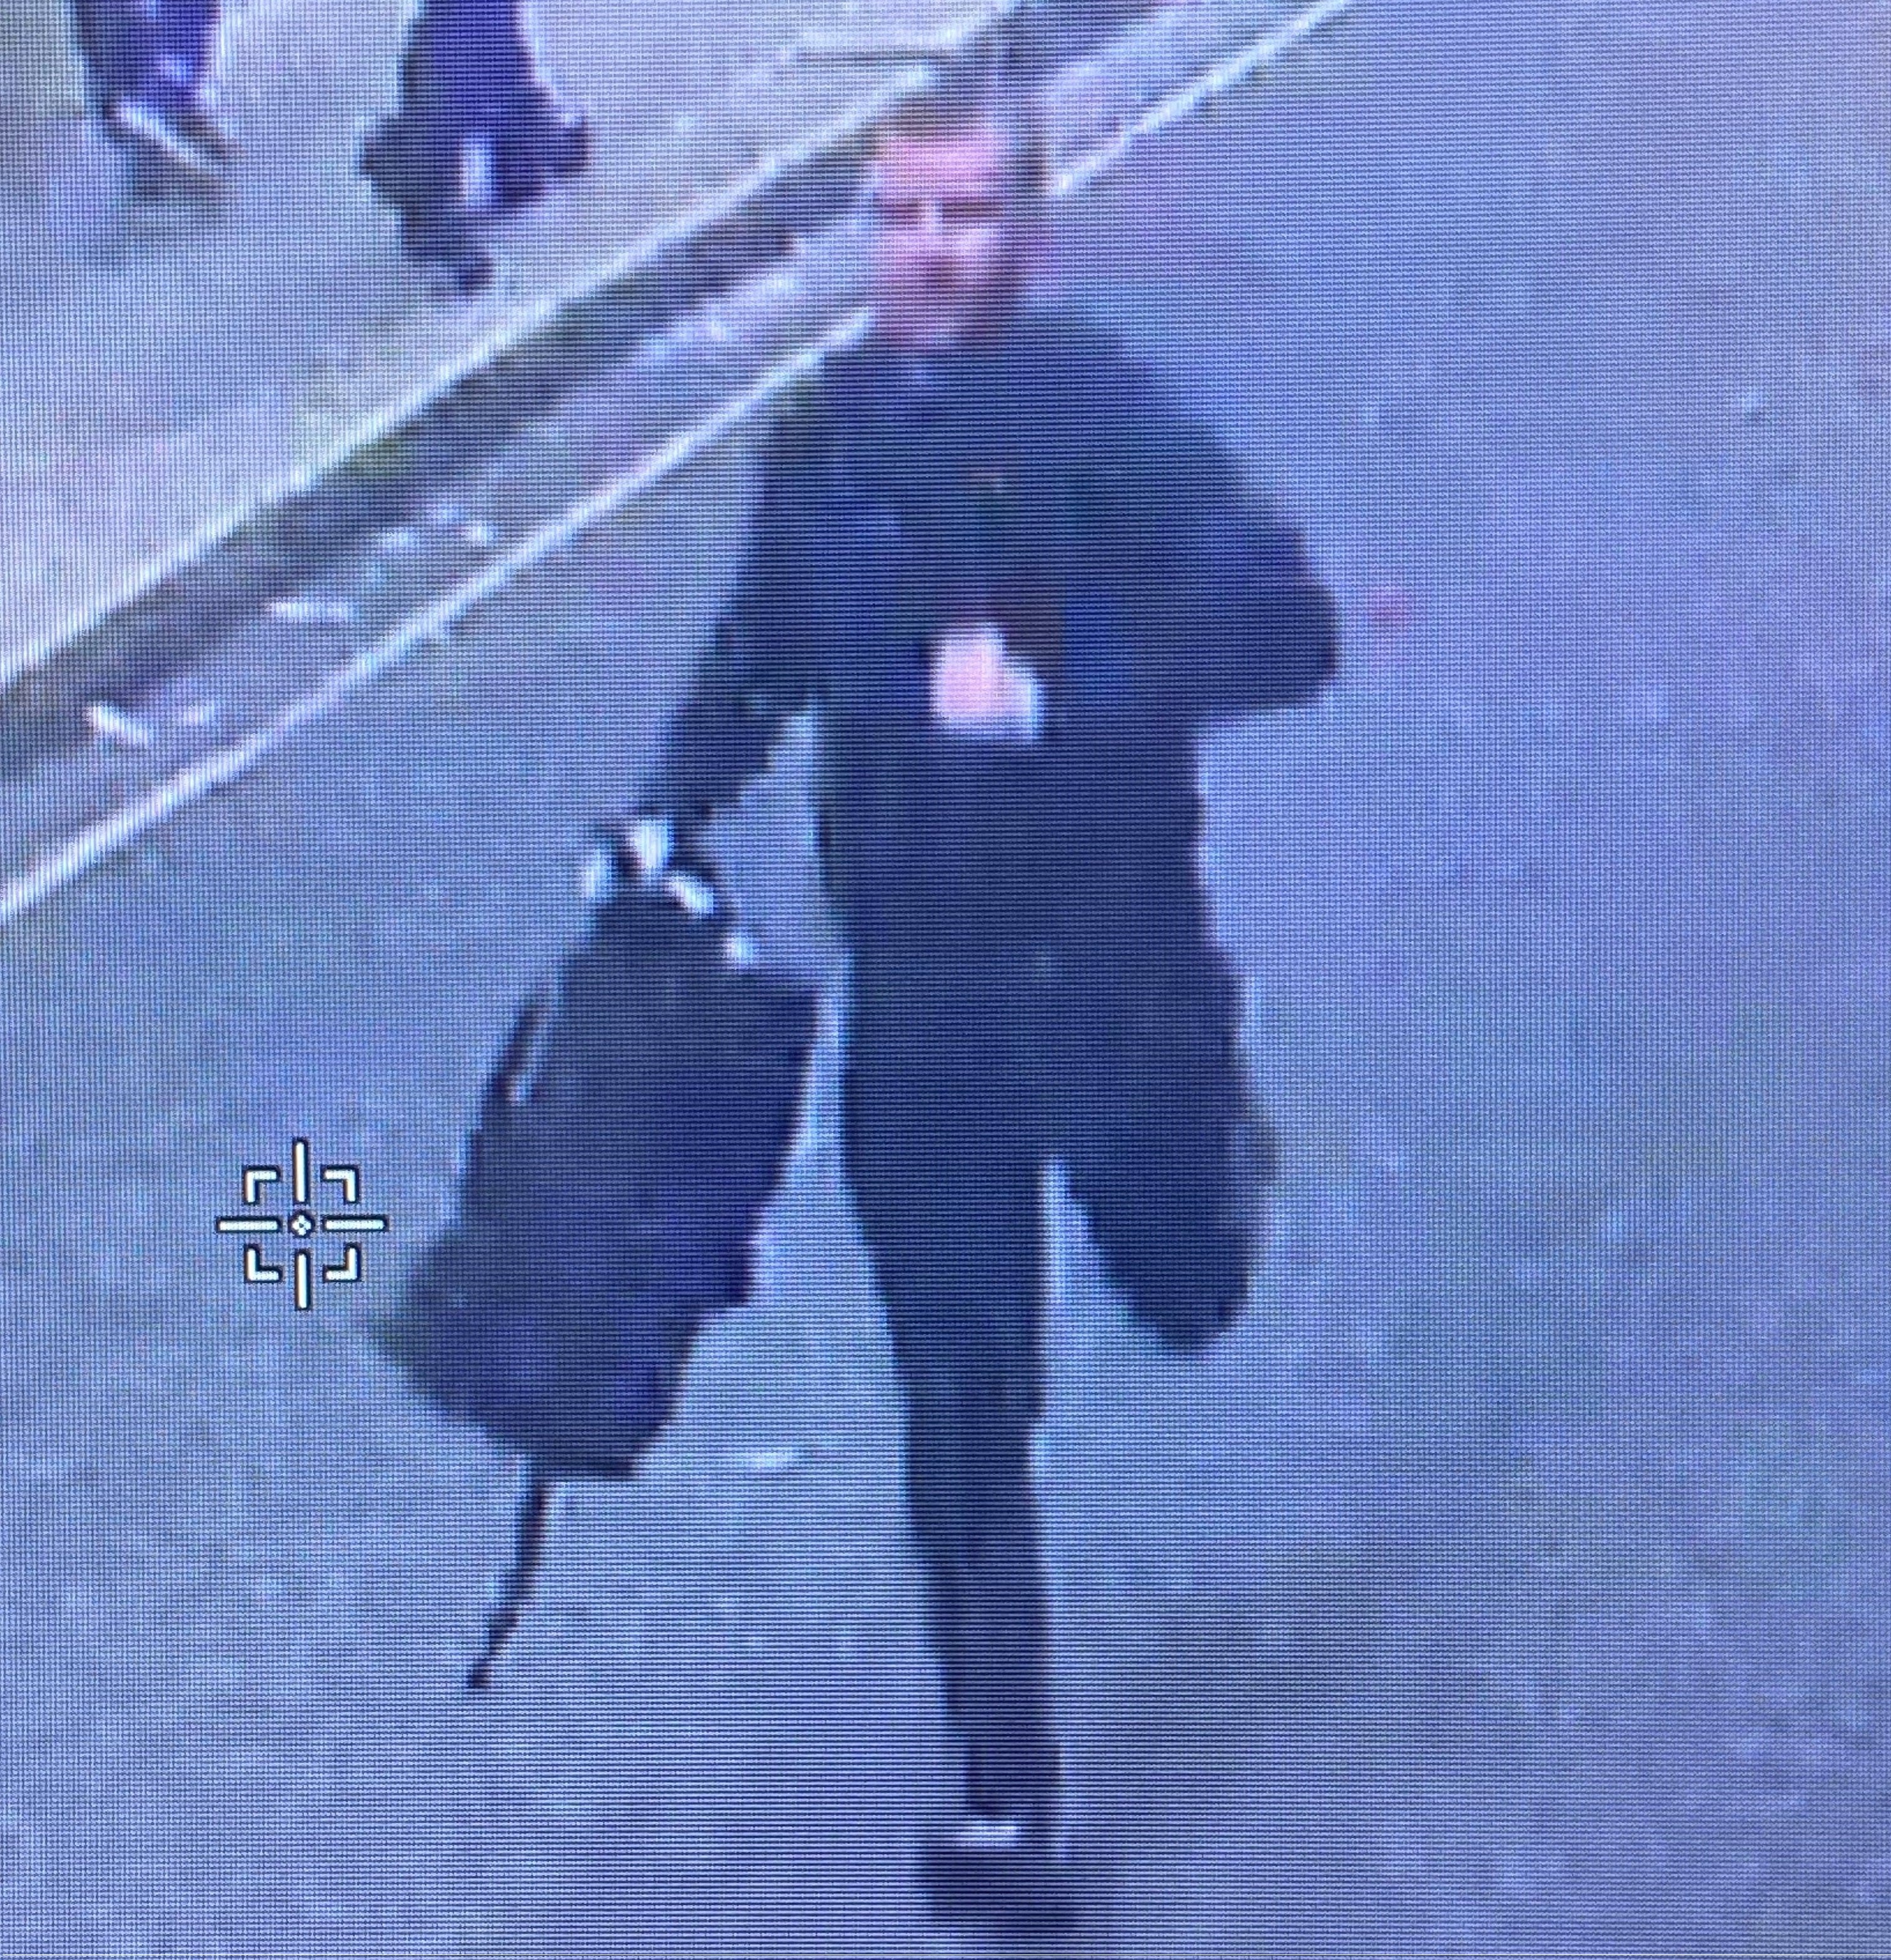 Police are seeking this man in connection with the stabbing